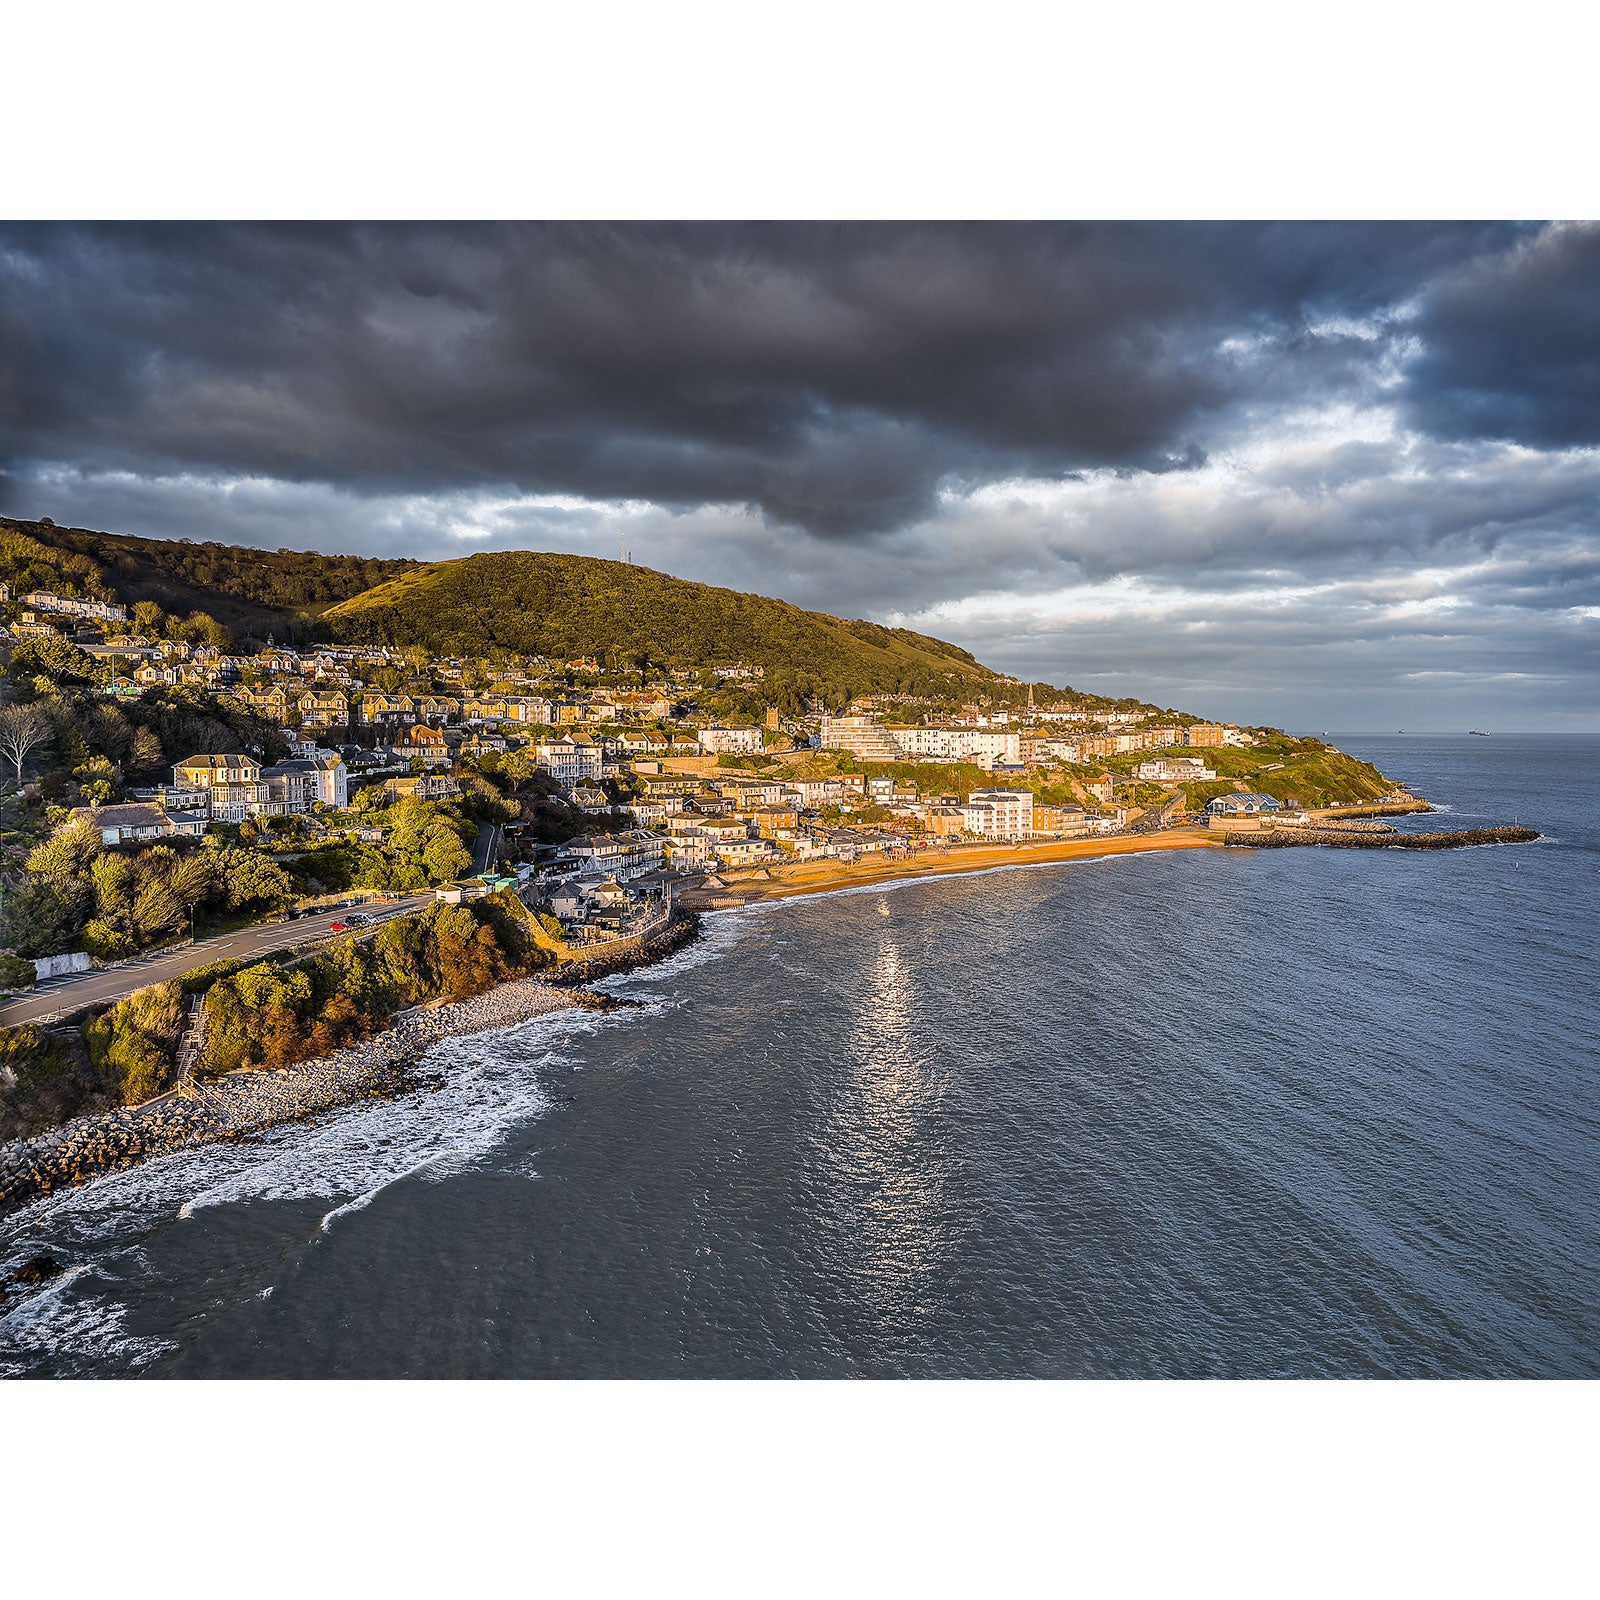 Coastal town bathed in sunlight with a dramatic cloud-covered sky overhead on the Isle of Ventnor by Available Light Photography.